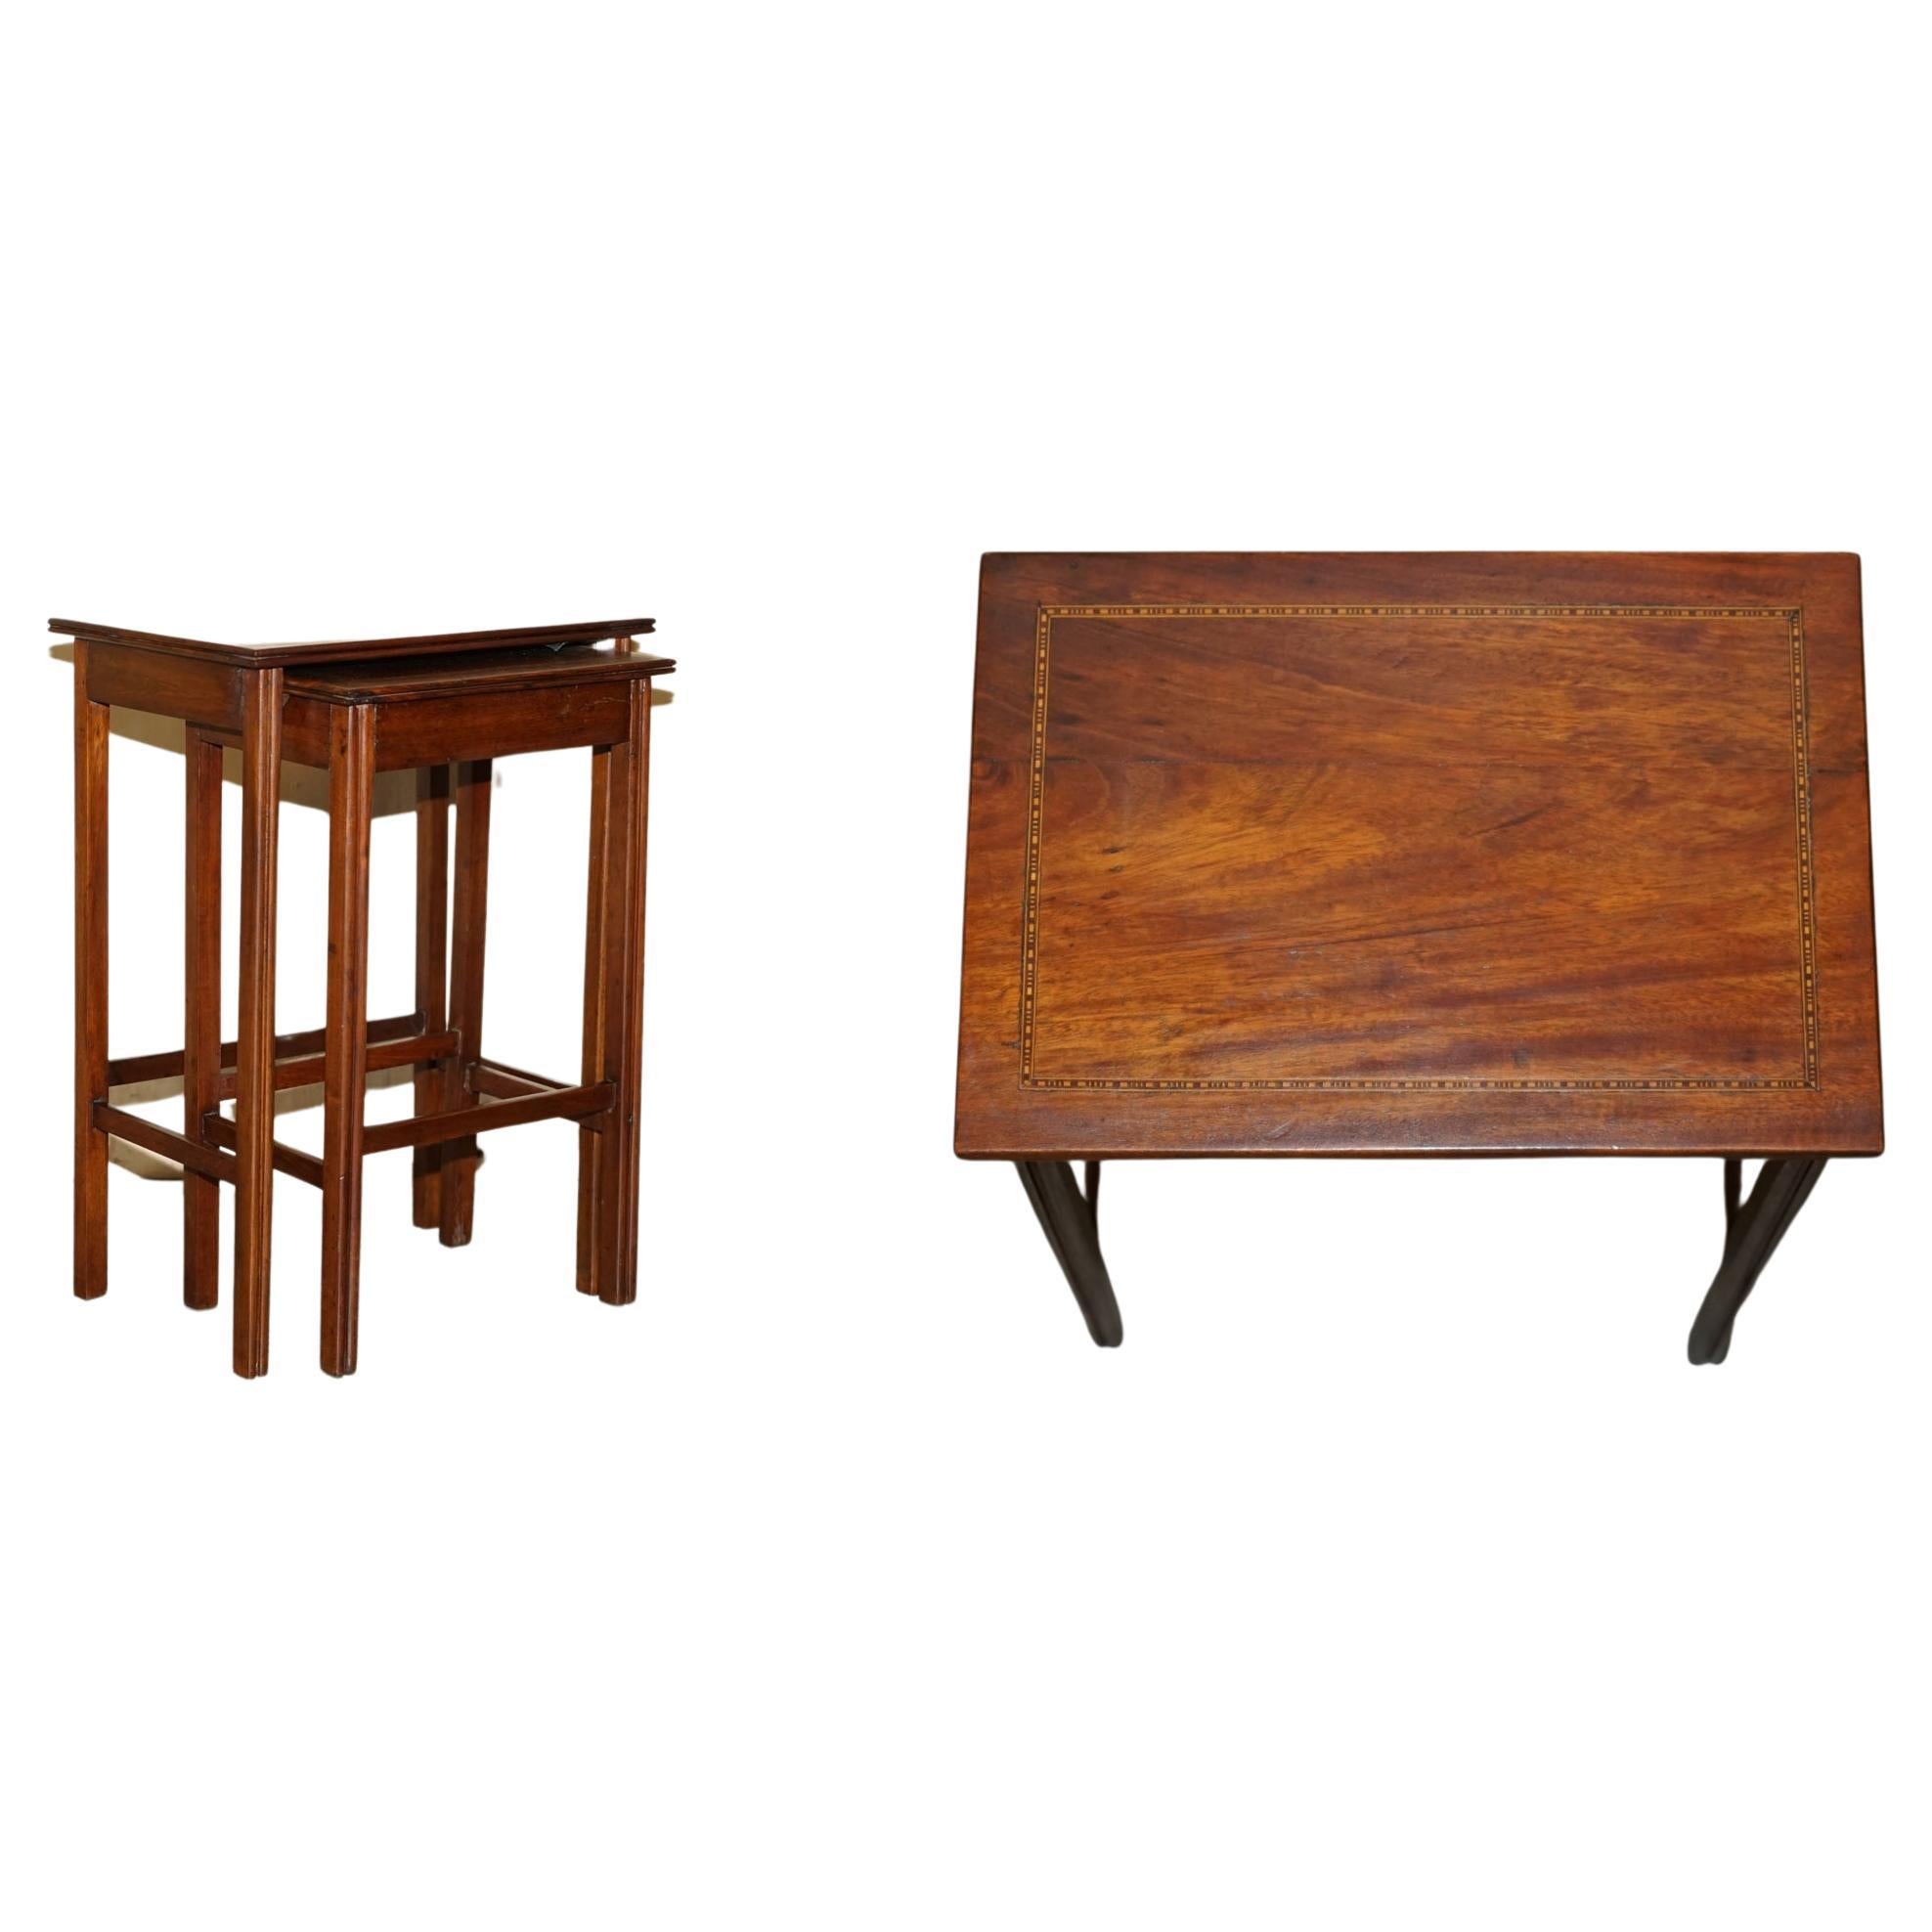 VINTAGE NEST OF TWO FLAmed HARDWOOD TABLES WiTH LOVELY BOXWOOD INLAID BOARDER'S en vente